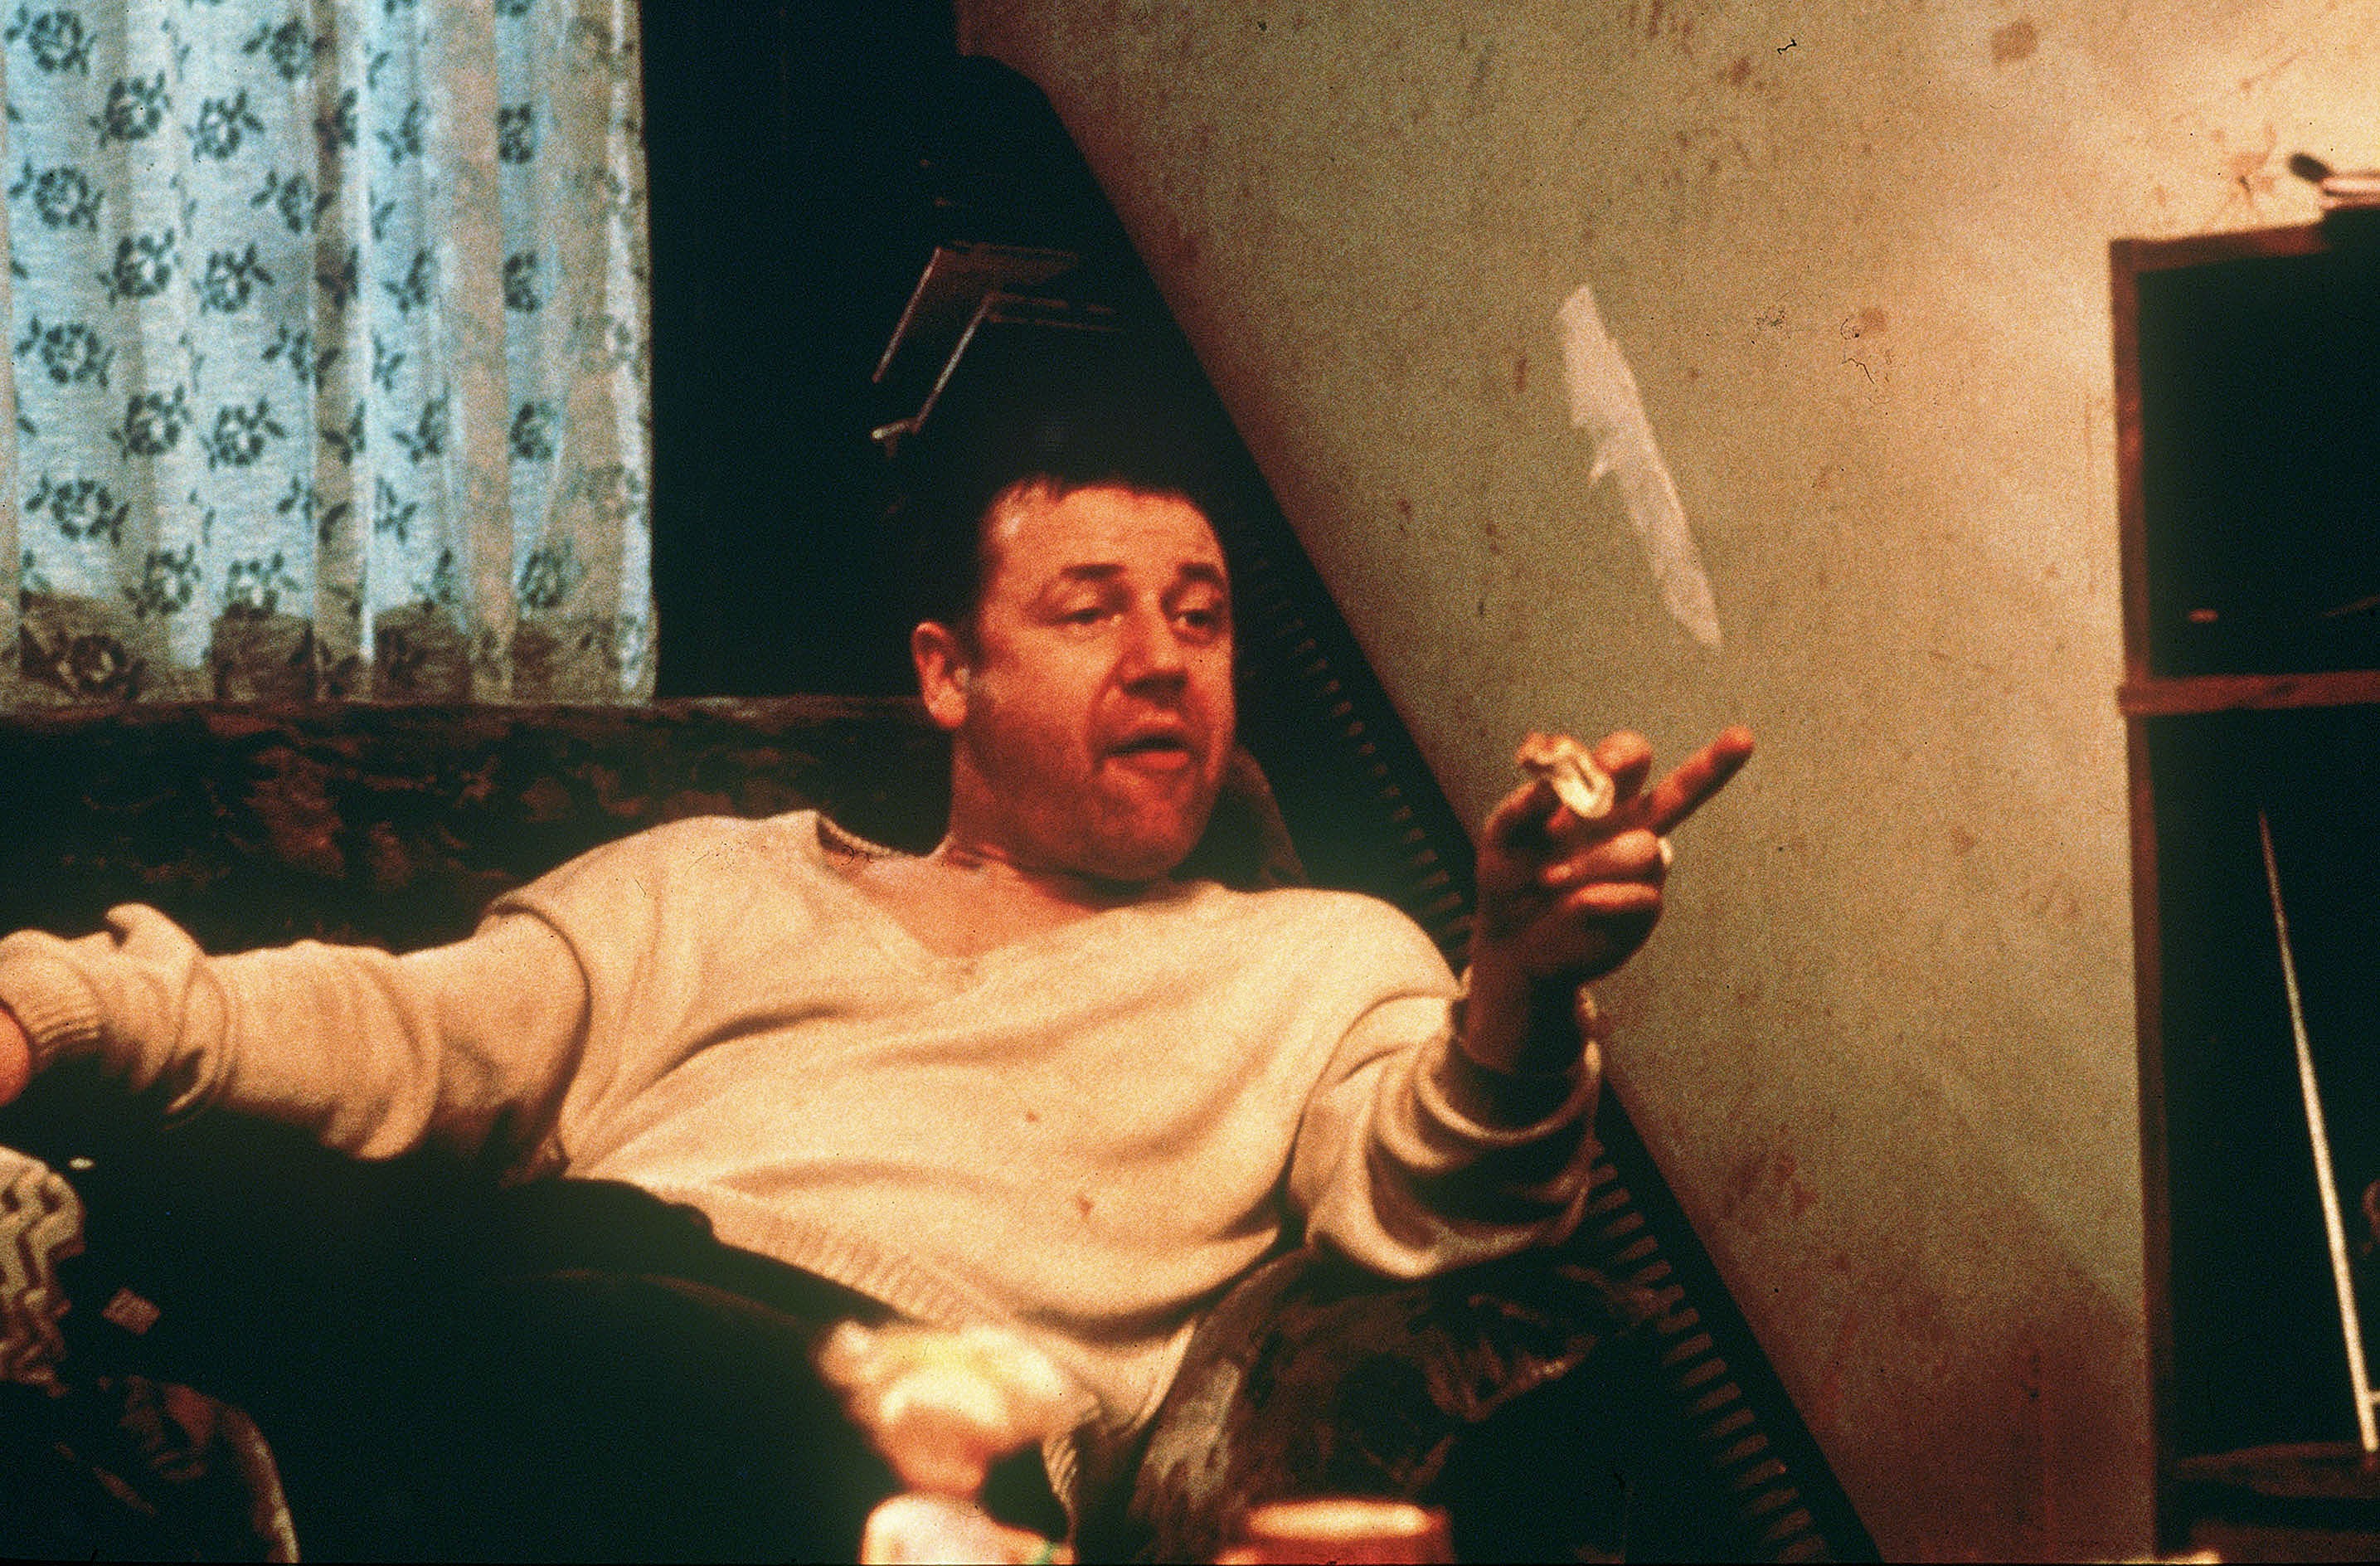 Making his point: Ray Winstone in ‘Nil by Mouth’